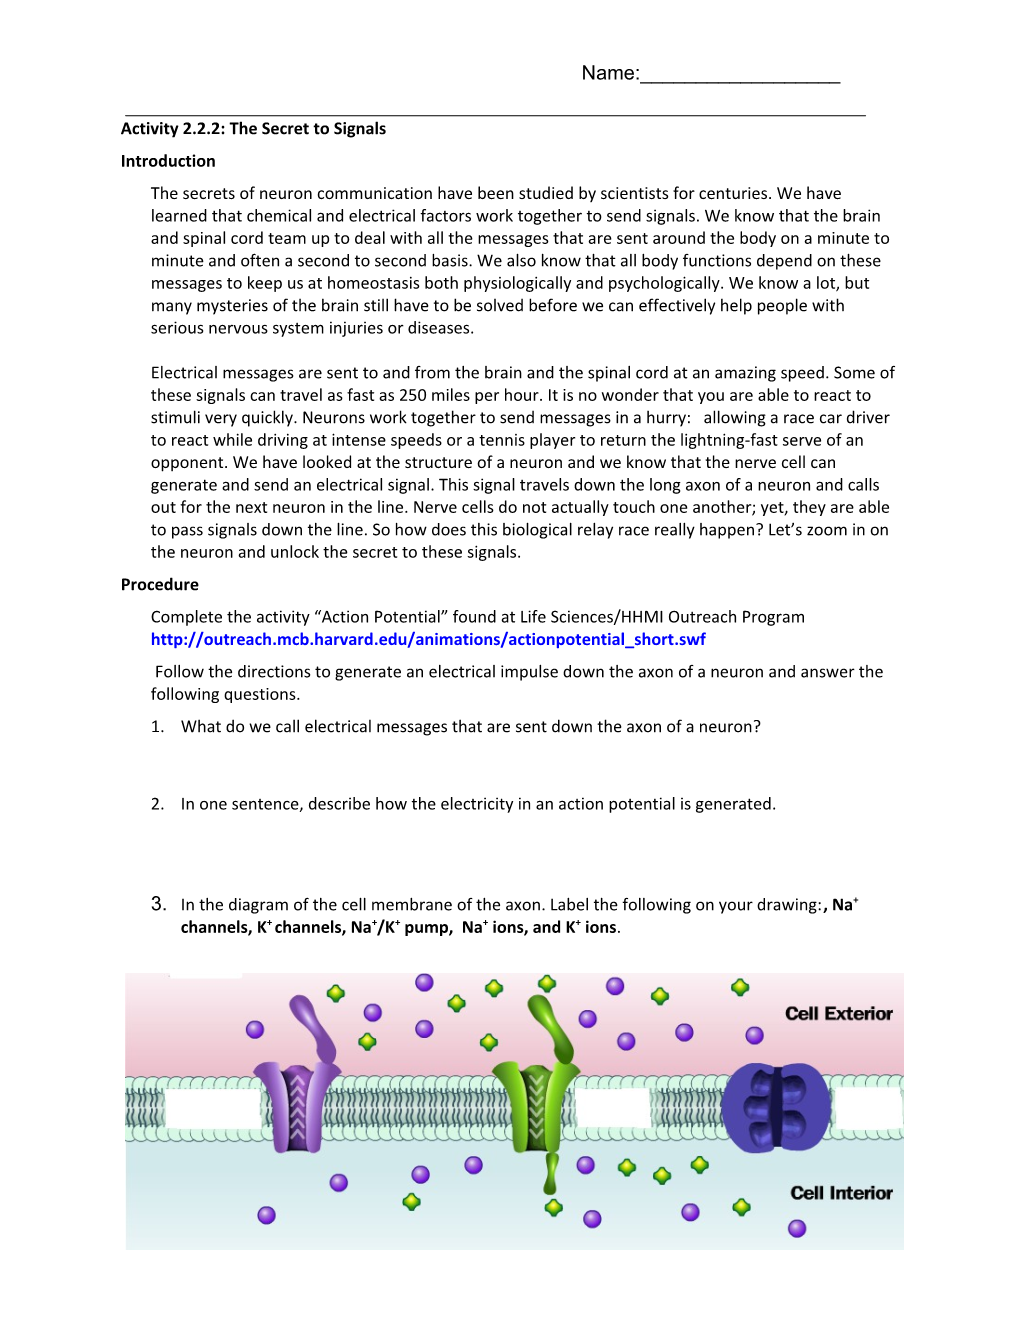 Complete the Activity Action Potential Found at Life Sciences/HHMI Outreach Program